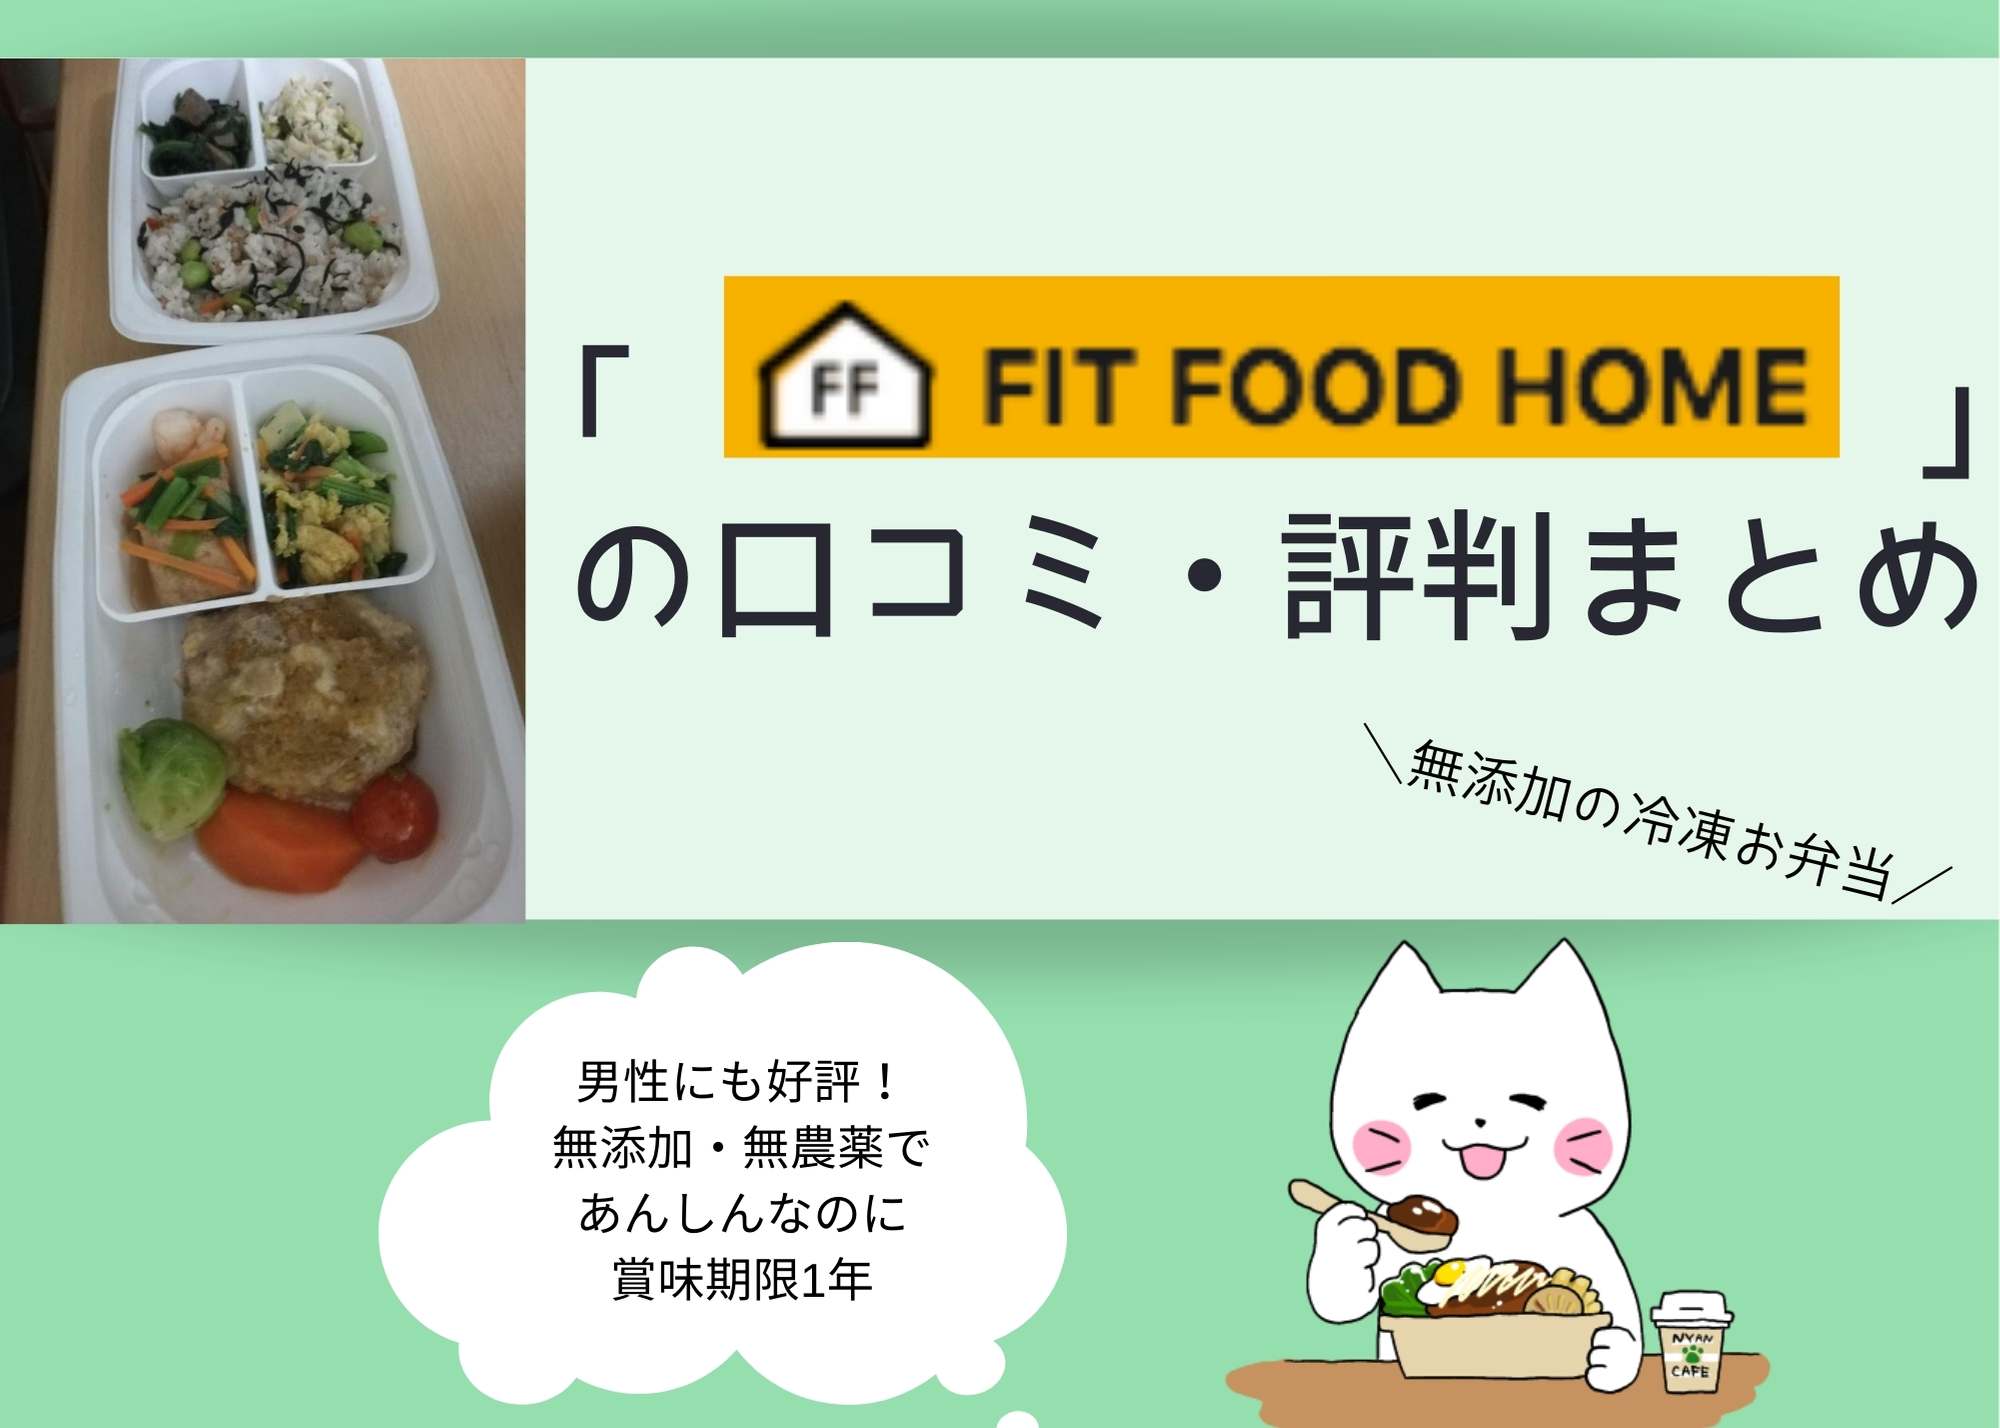 「FIT FOOD HOME」の口コミ・評判まとめ